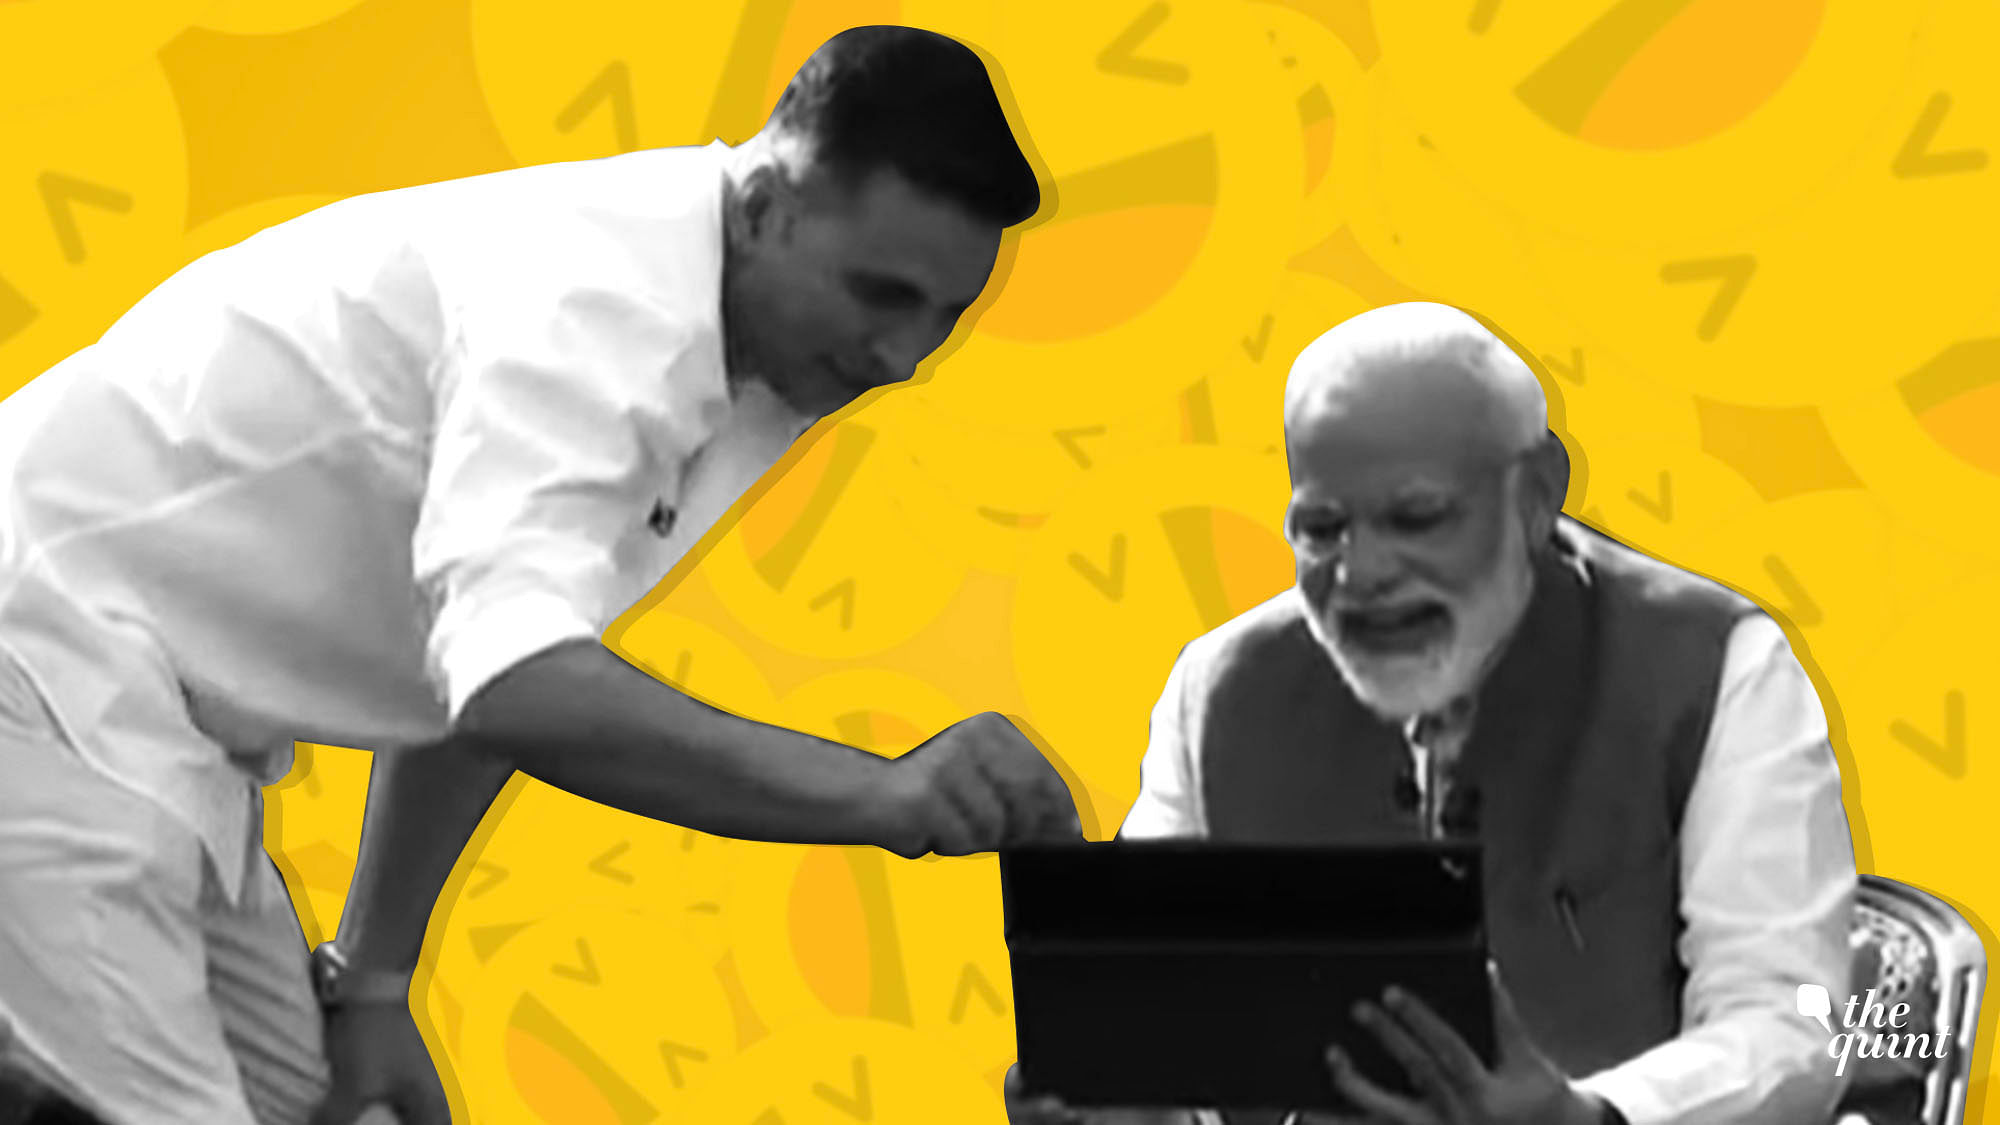 Akshay Kumar whipped out a sleek tablet and proceeded to lighten the mood by showing PM Modi a bunch of memes.